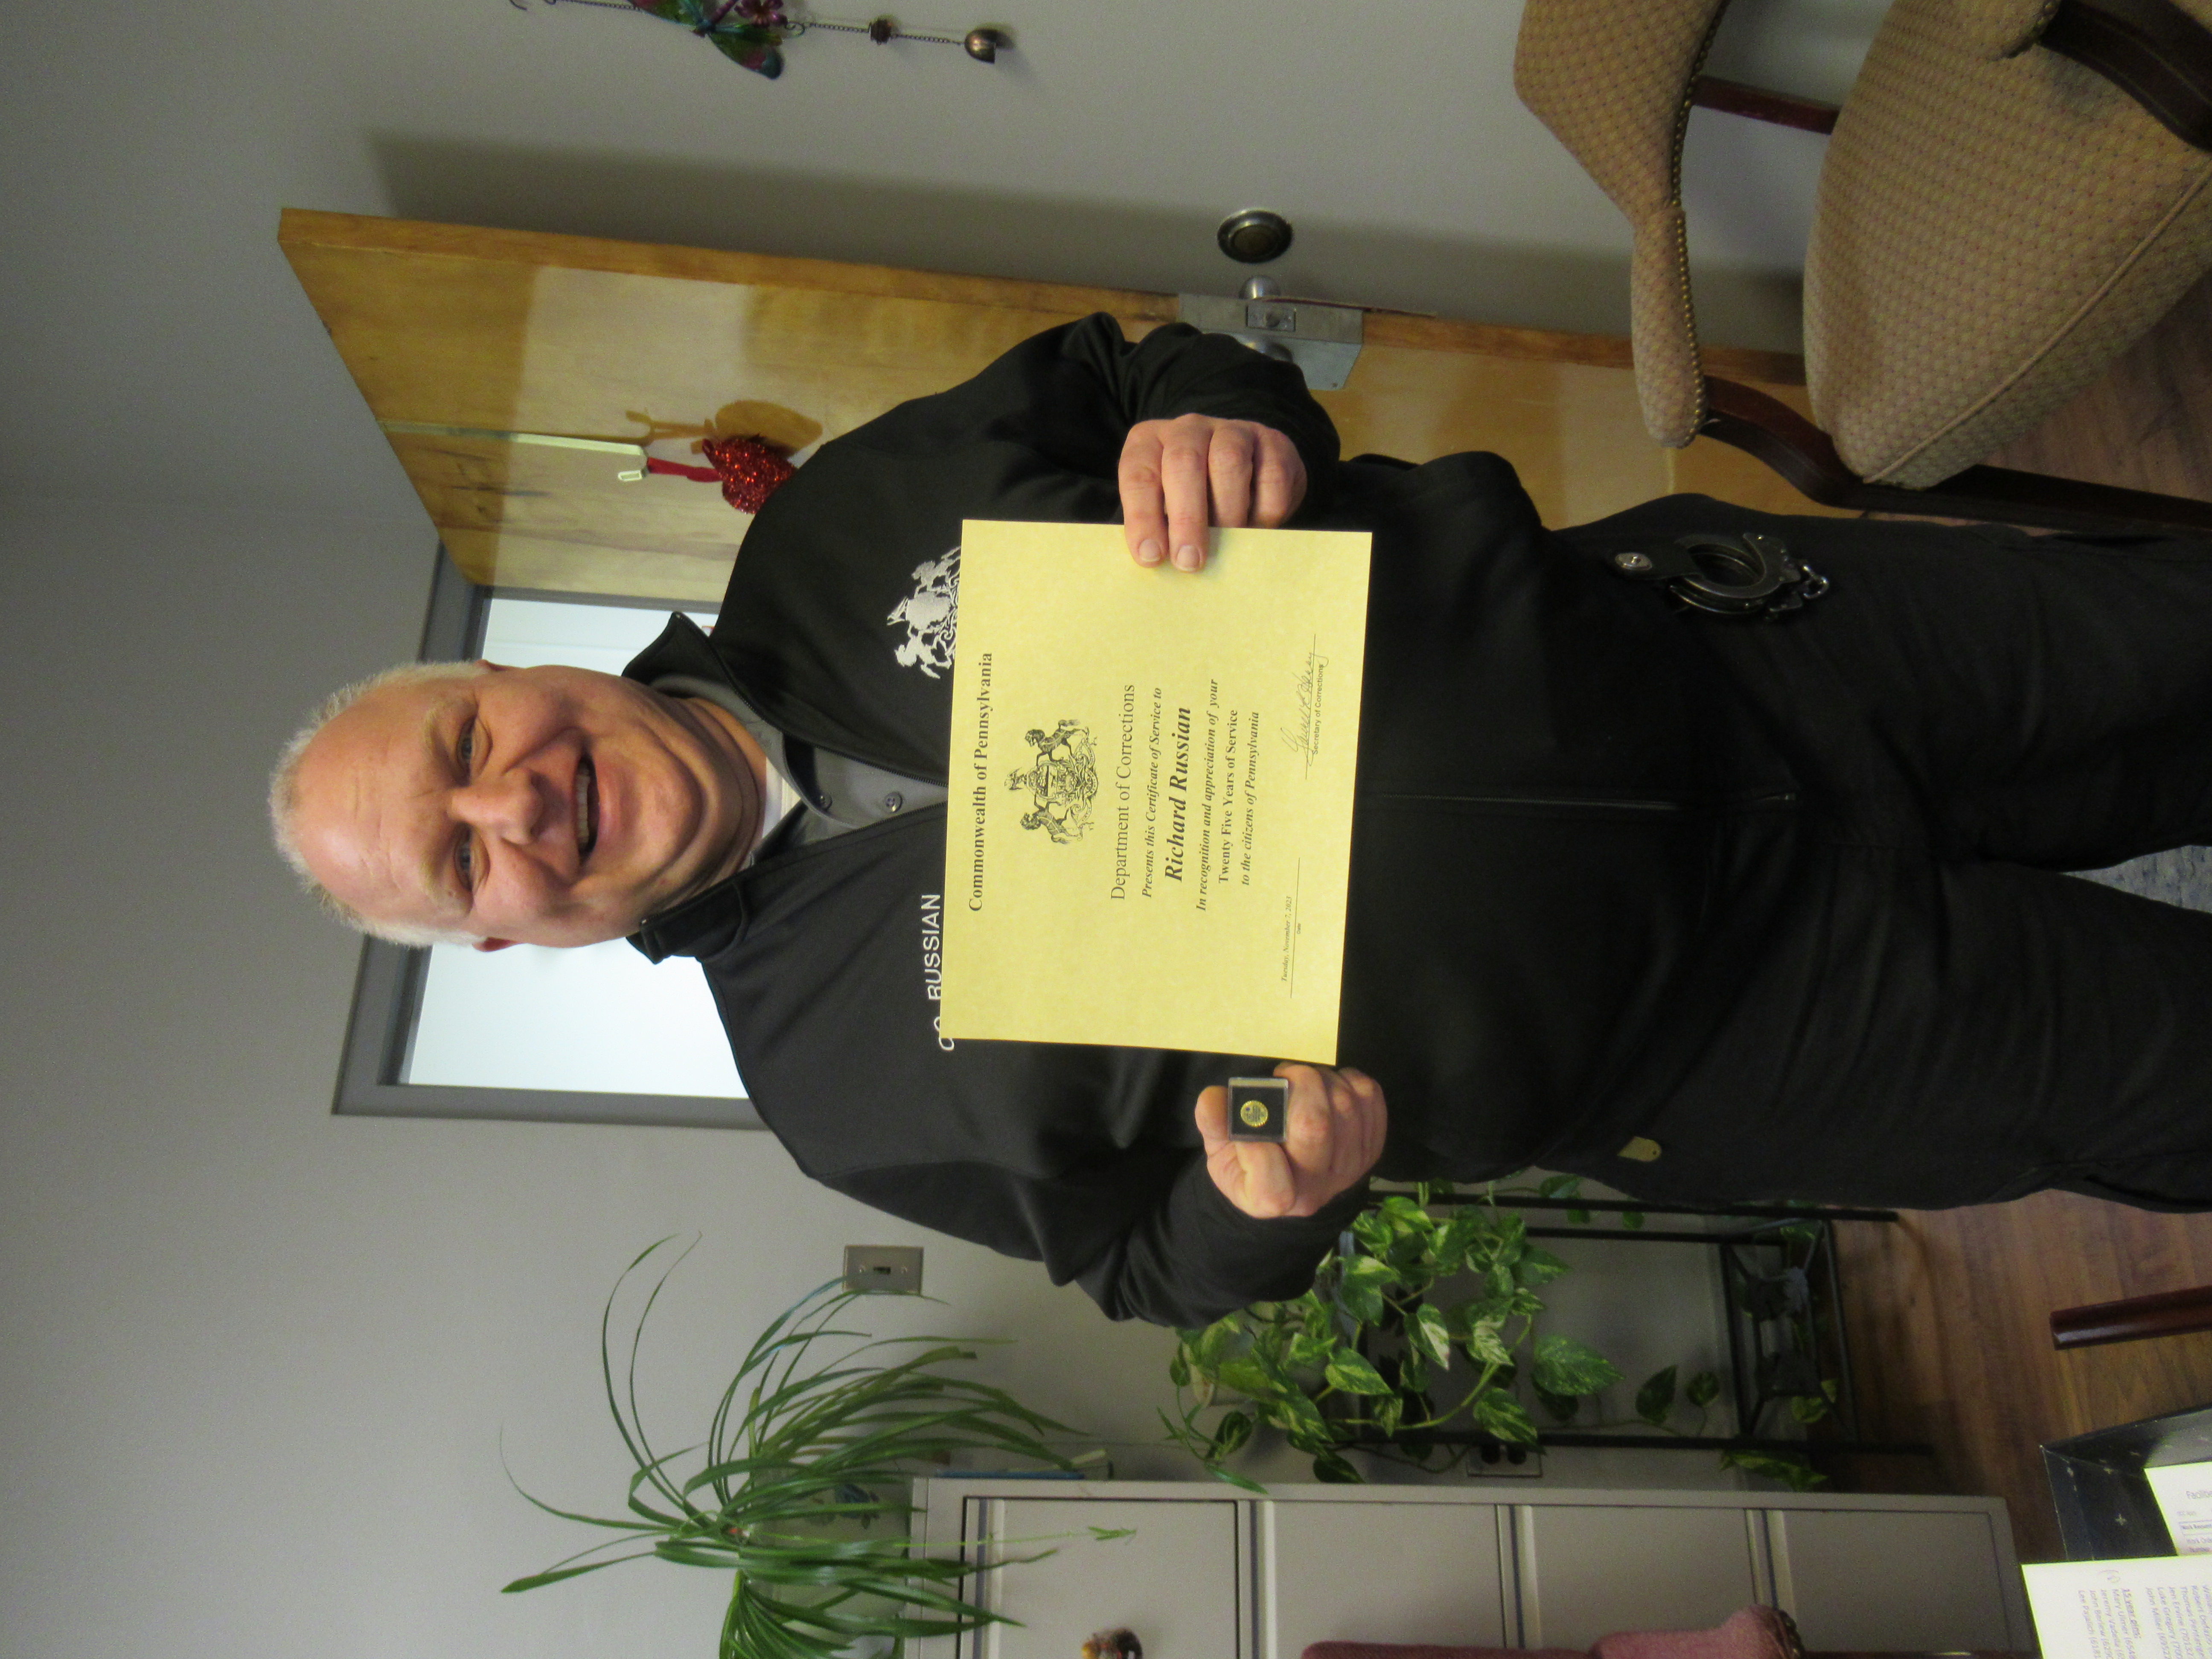 CO Richard Russian holds a certificate.